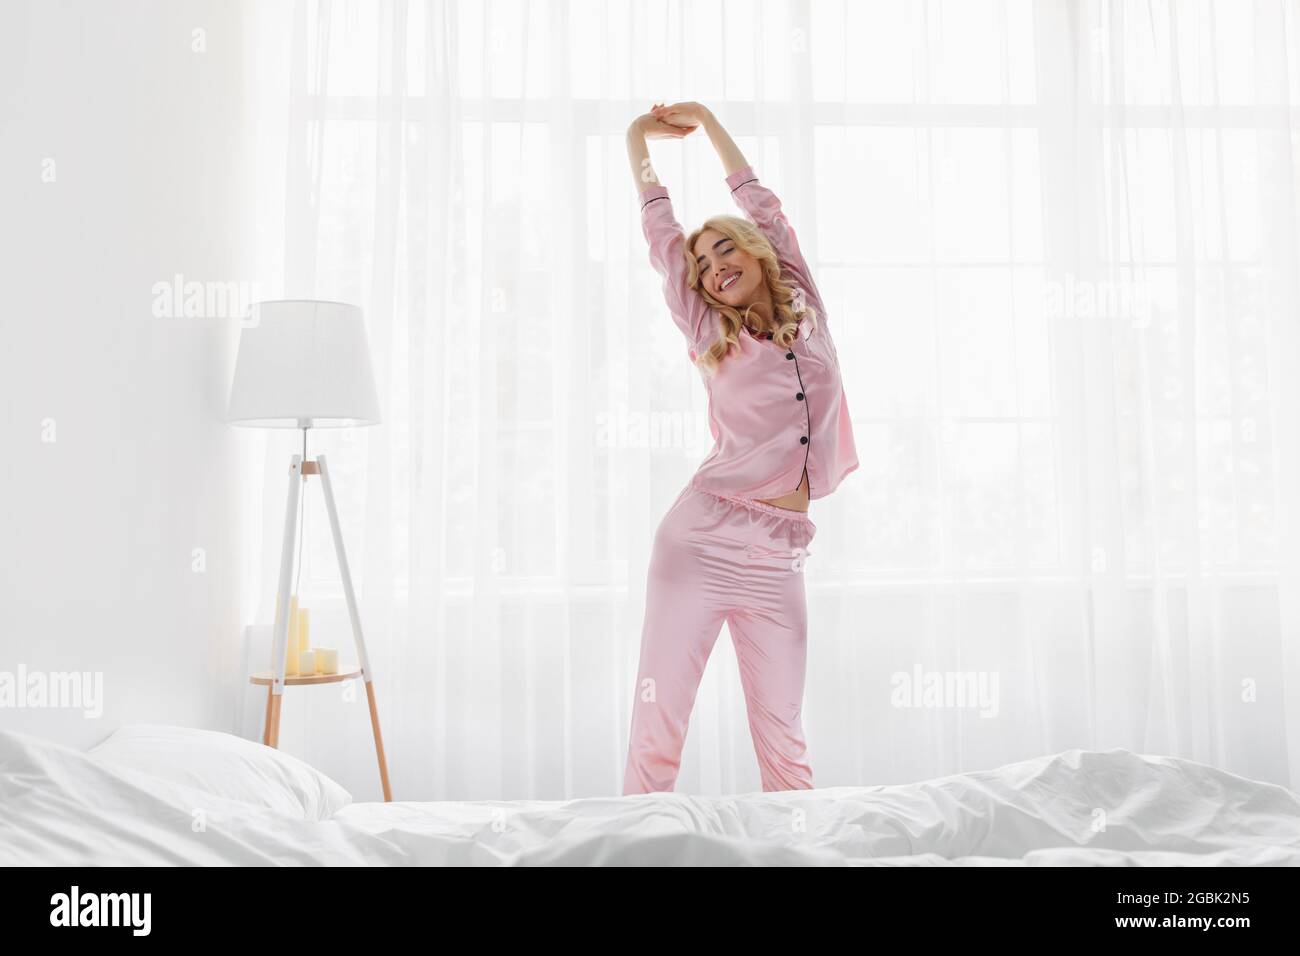 Wake up in morning, happy young lady greets new day with warm sunlight flare Stock Photo